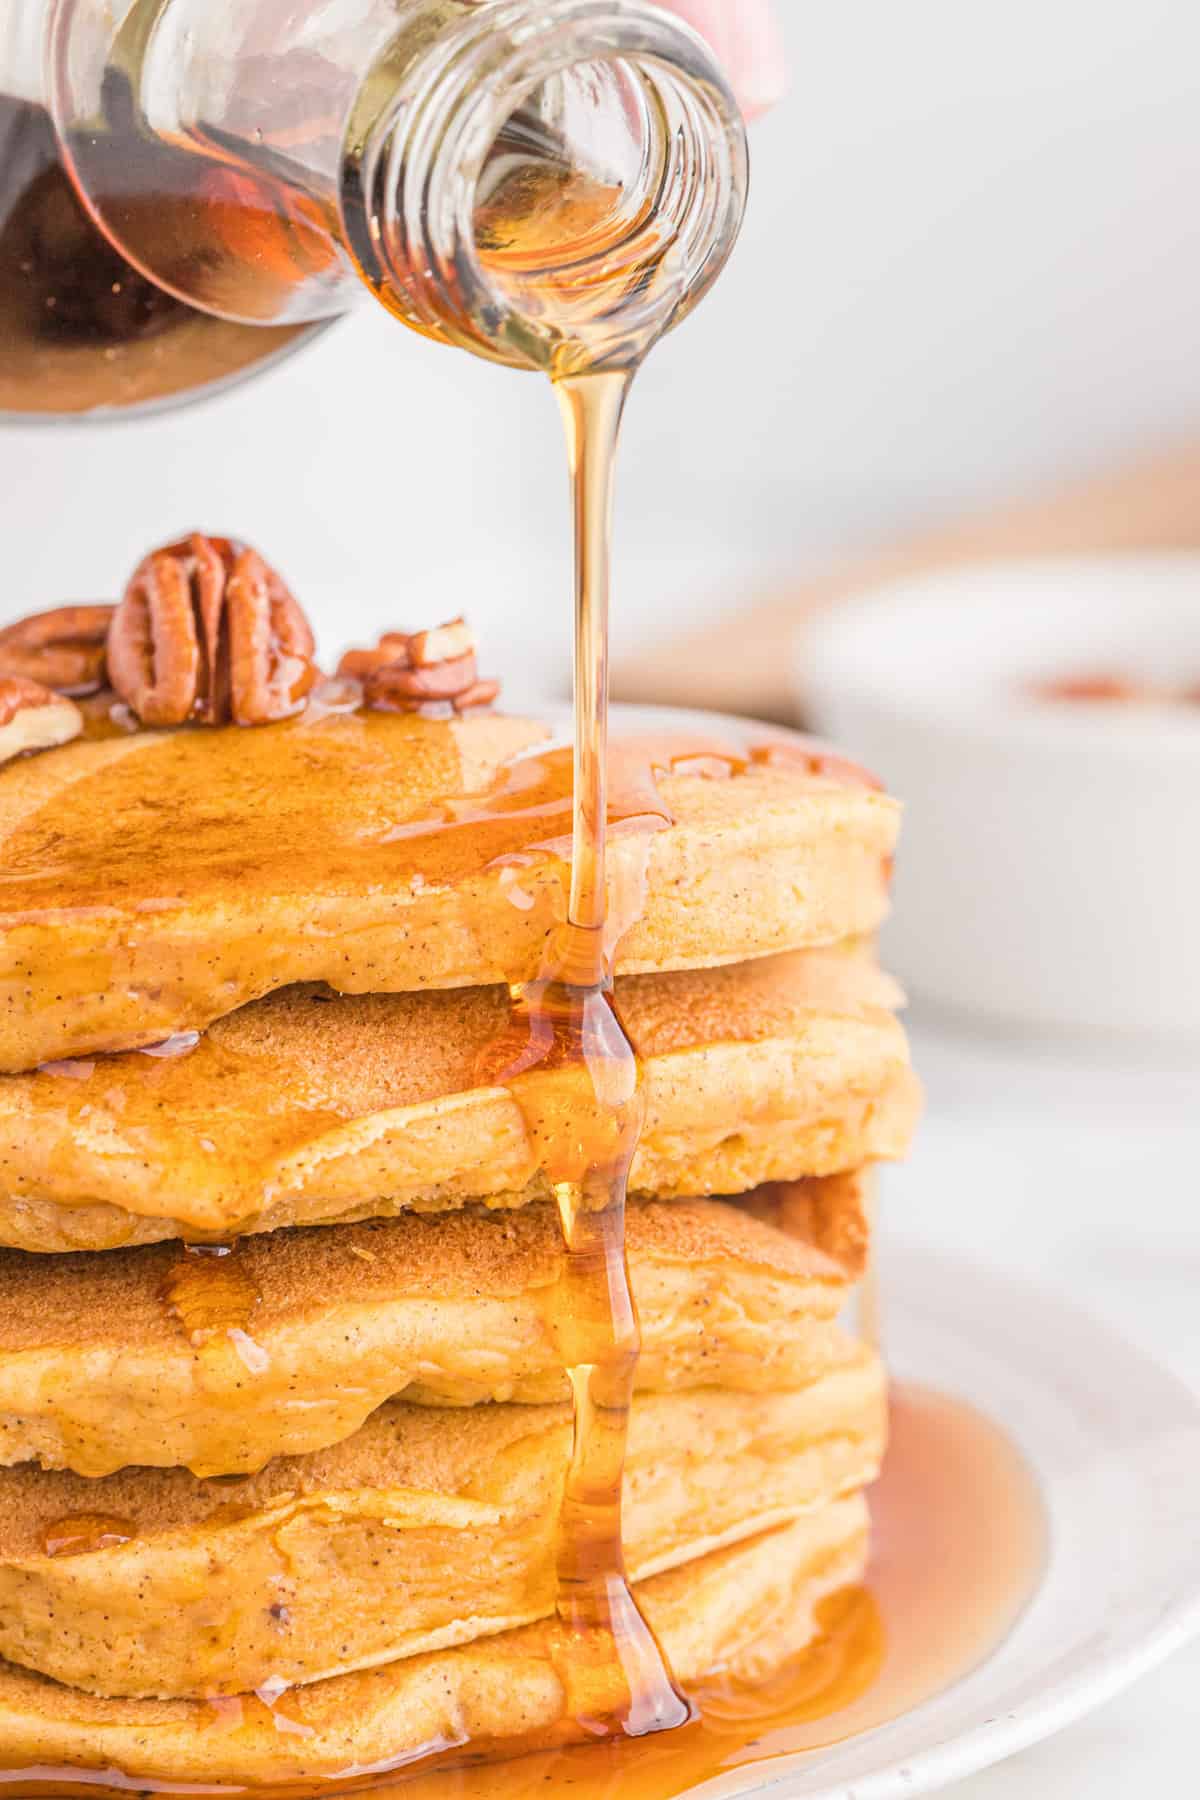 Sweet potato pancakes being drizzled with maple syrup.